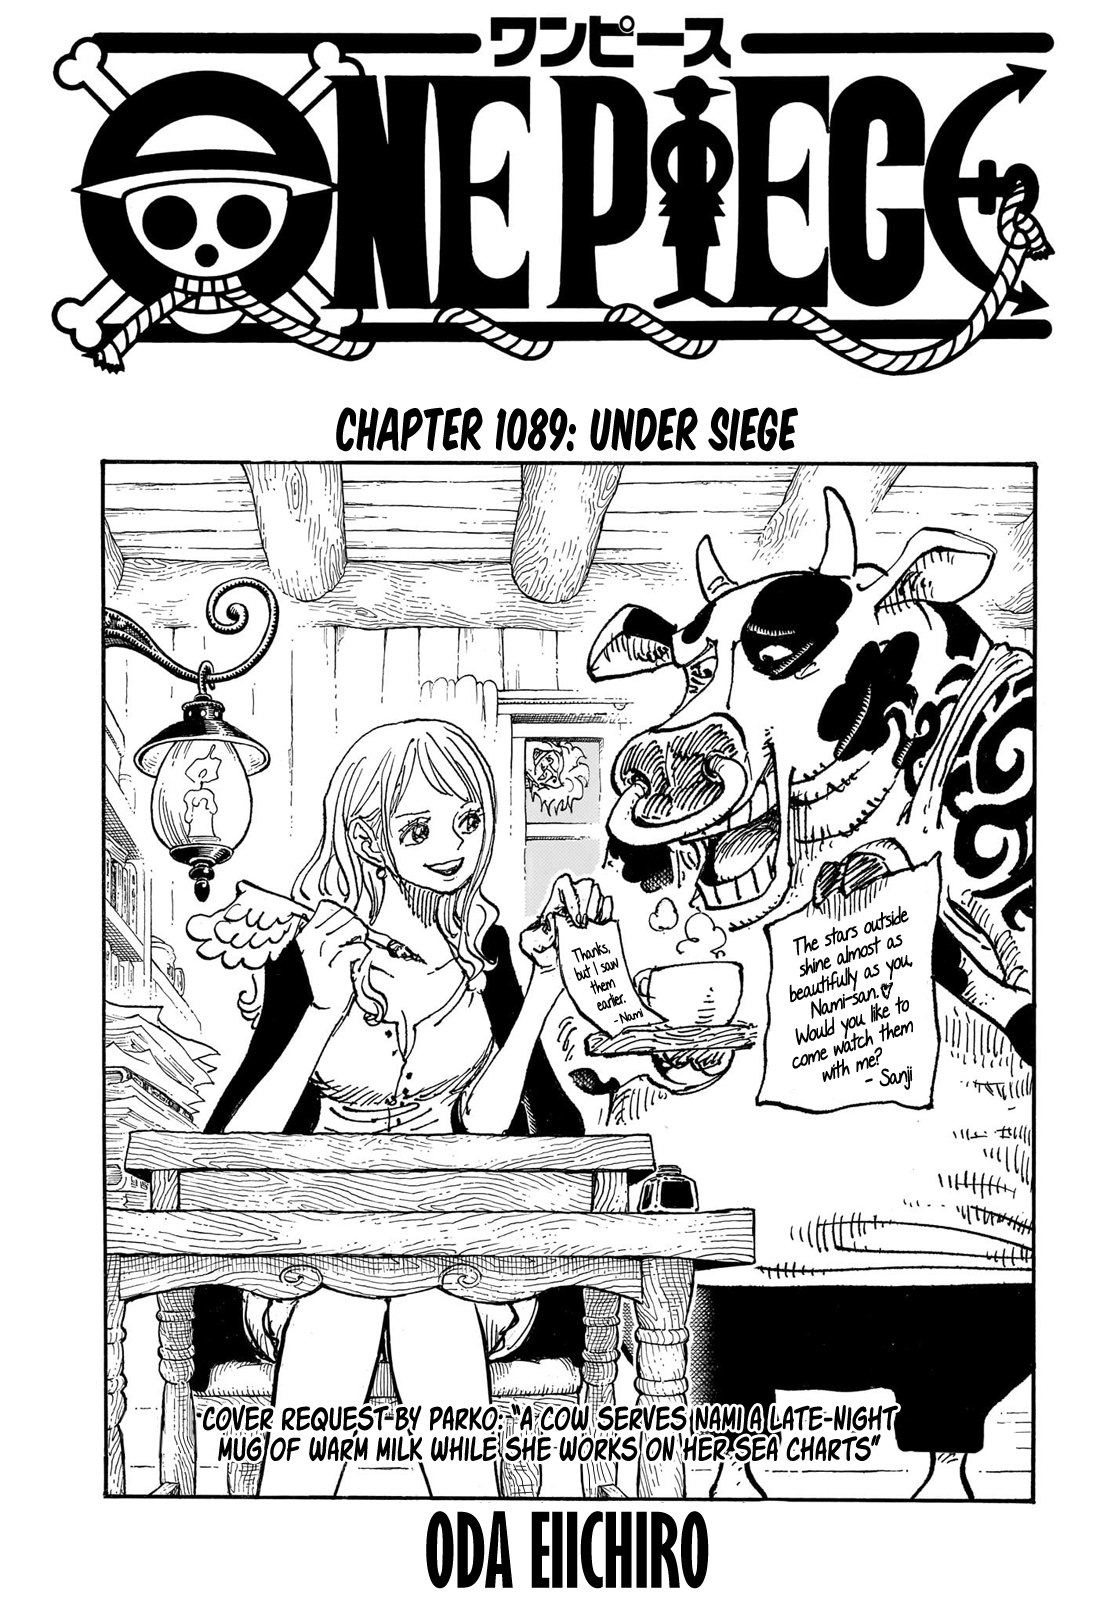 One Piece Chapter 1044 (leaked): Why the big reveal makes perfect sense